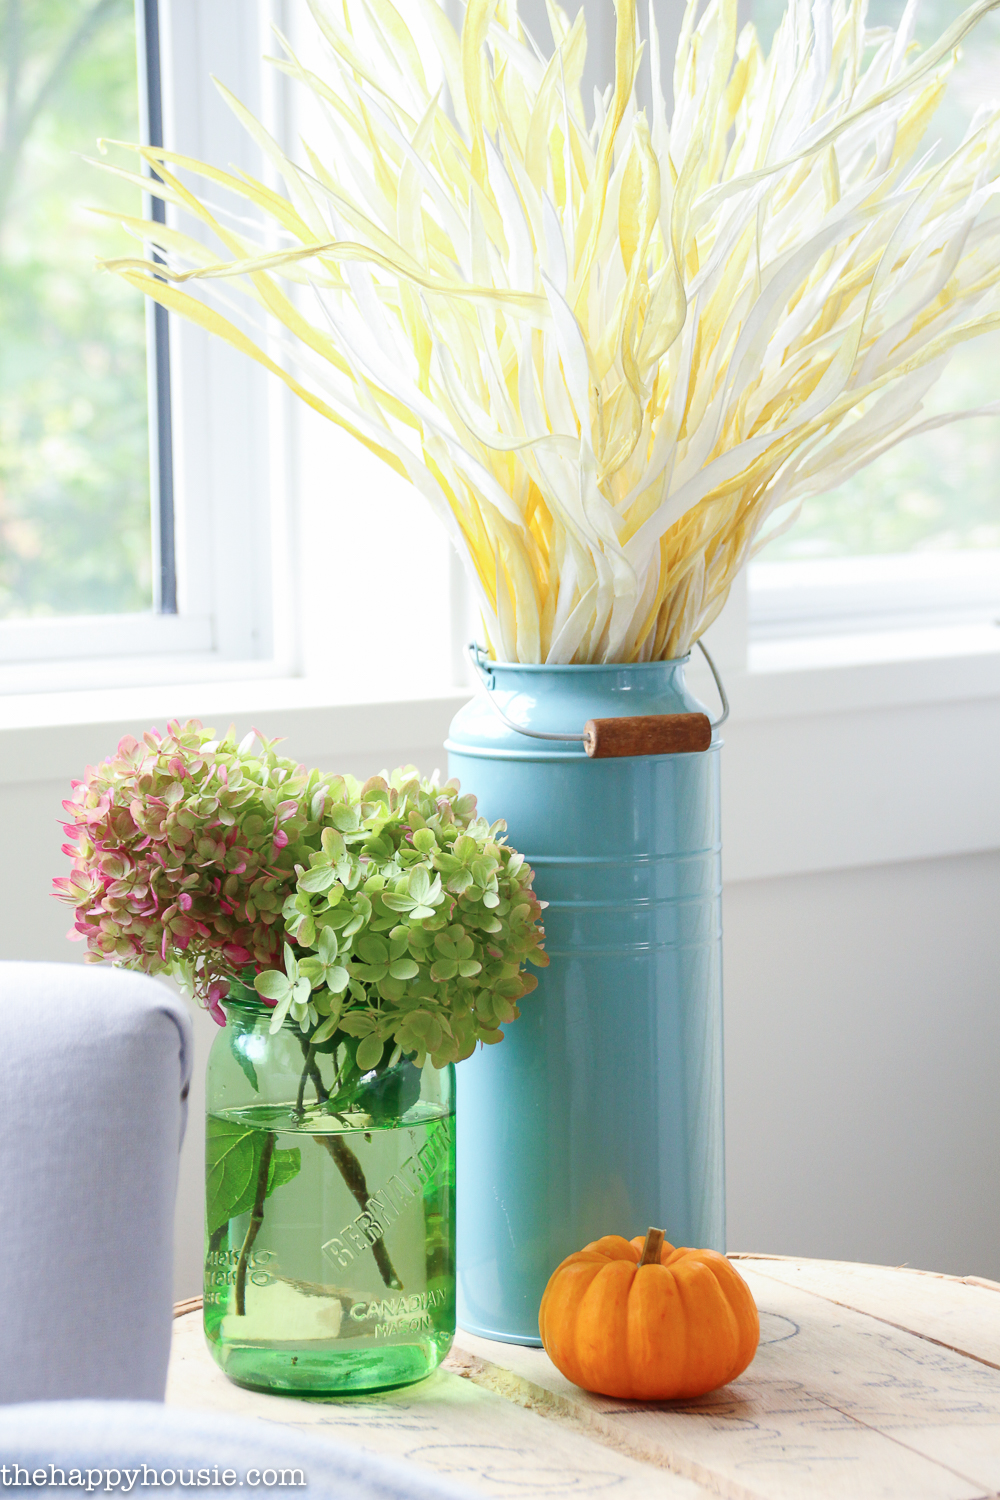 There are hydrangeas in a clear green vase beside the wheat stalks.